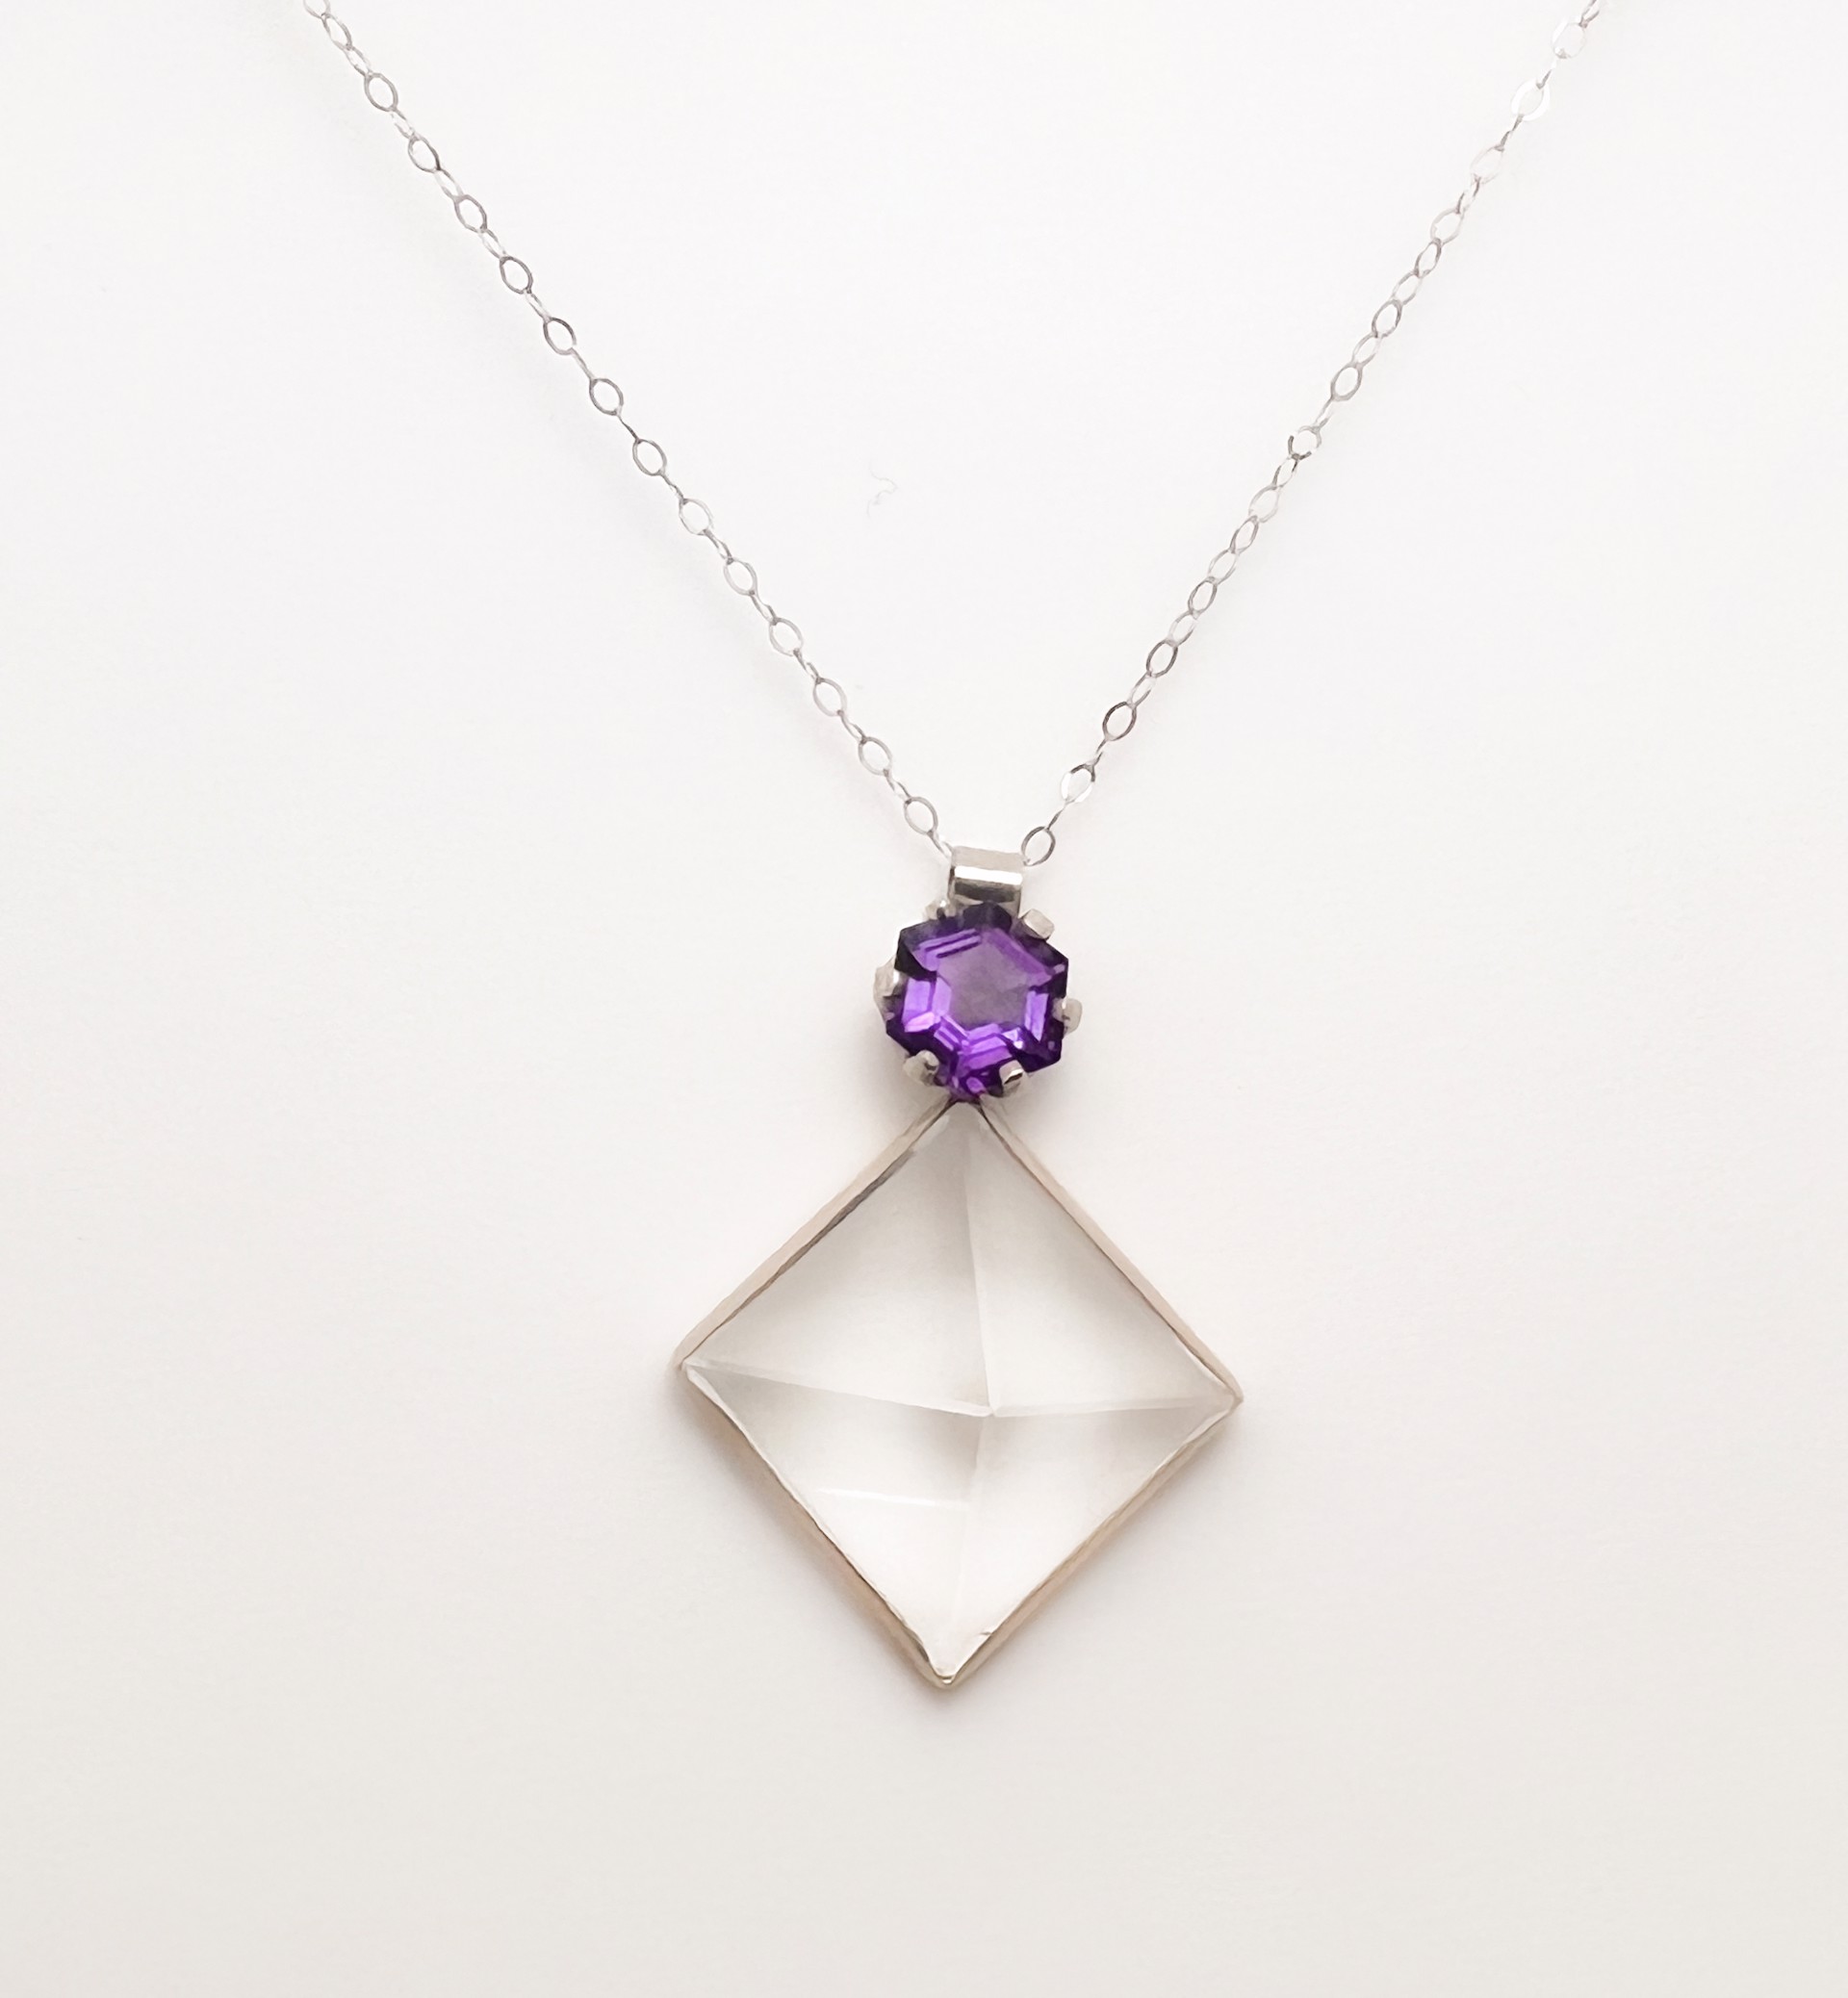 Quartz Crystal Pyramid and Amethyst Pendant by D'ETTE DELFORGE